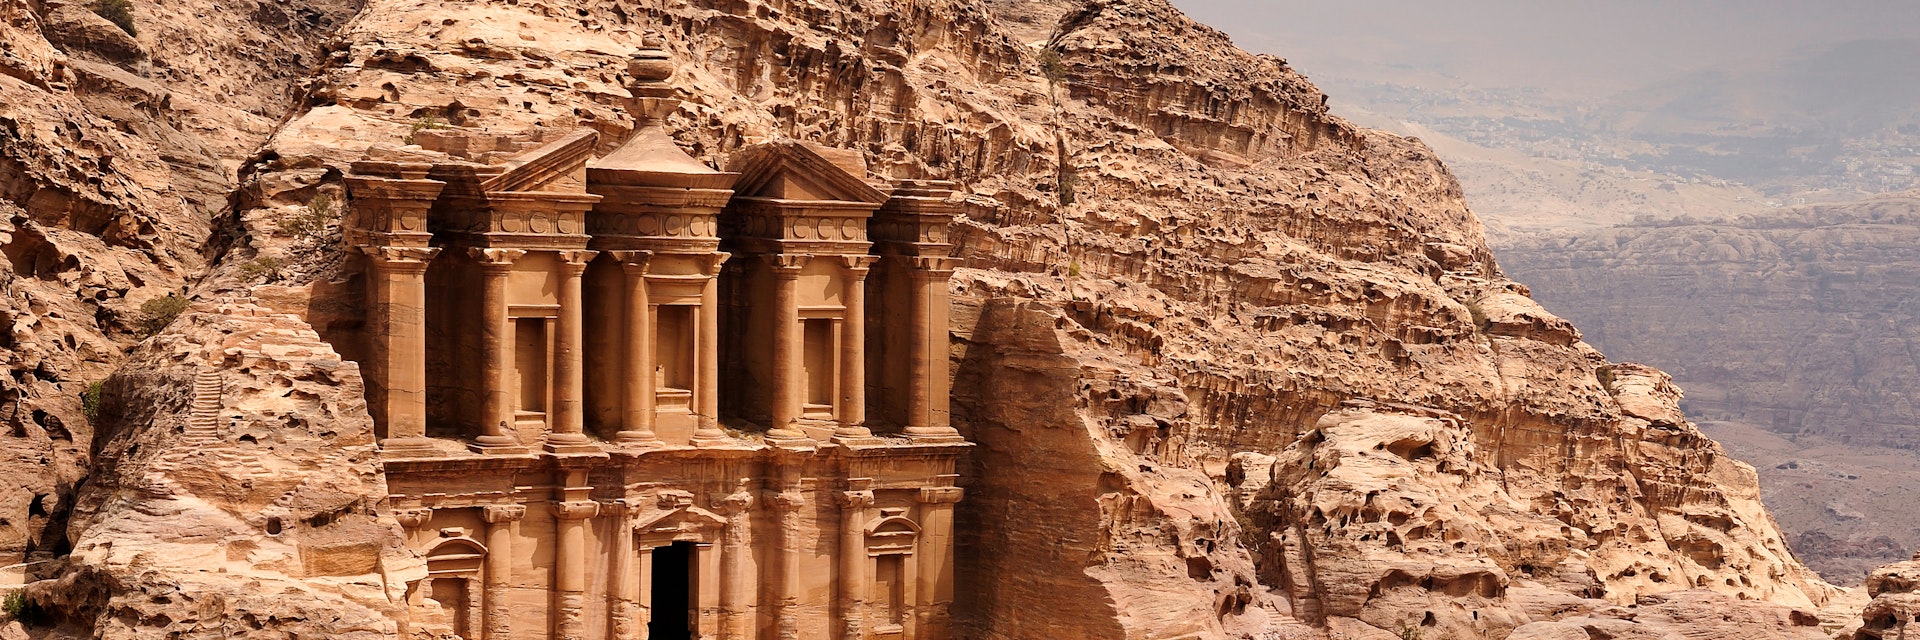 There is a person by the doorway to get a scale of the size. A classic view of El Deir, The Monastery in Petra. Shown in the context of the mountain that the facade was carved out of by the Nabataeans in the 1st century. The facade measures 50 metres wide by approximately 45 meters high.